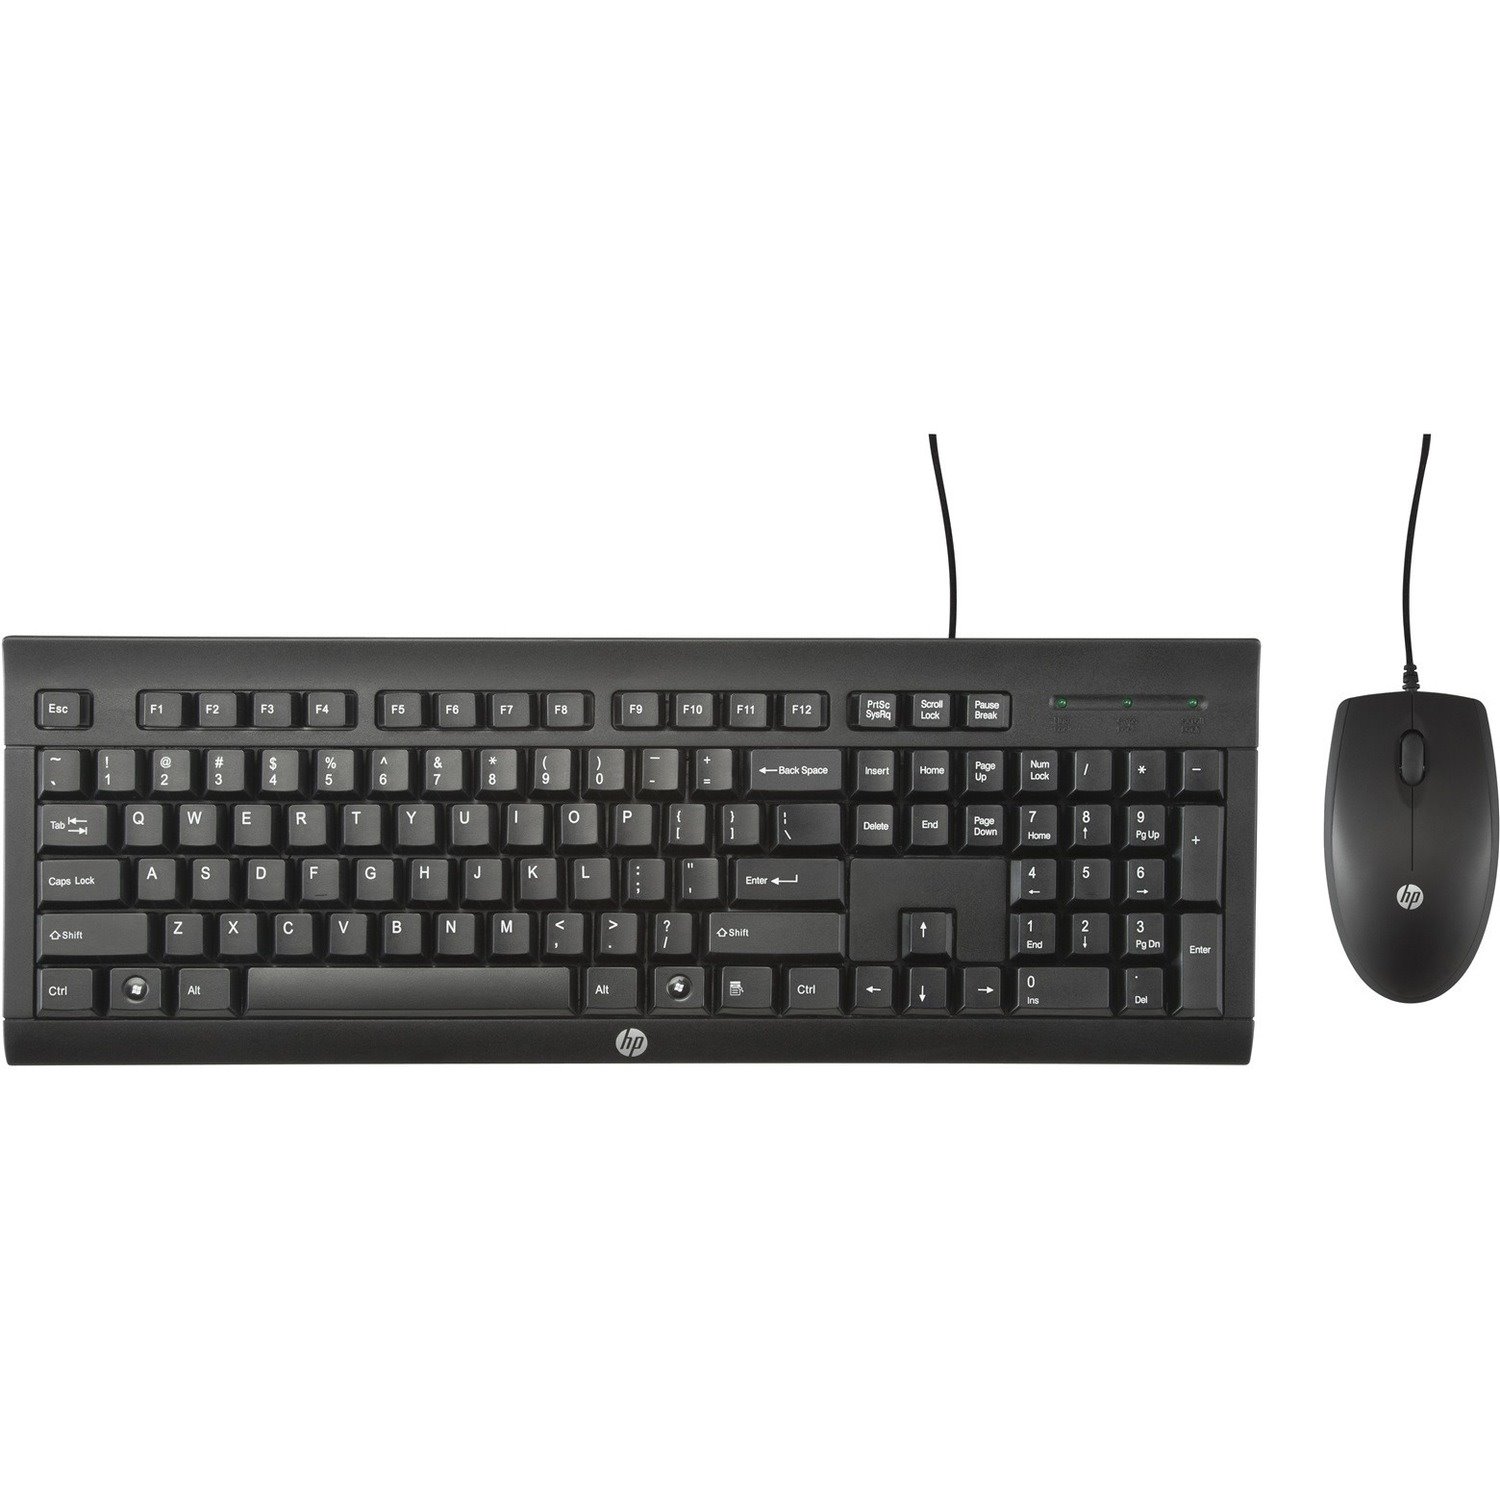 HP C2500 Keyboard & Mouse